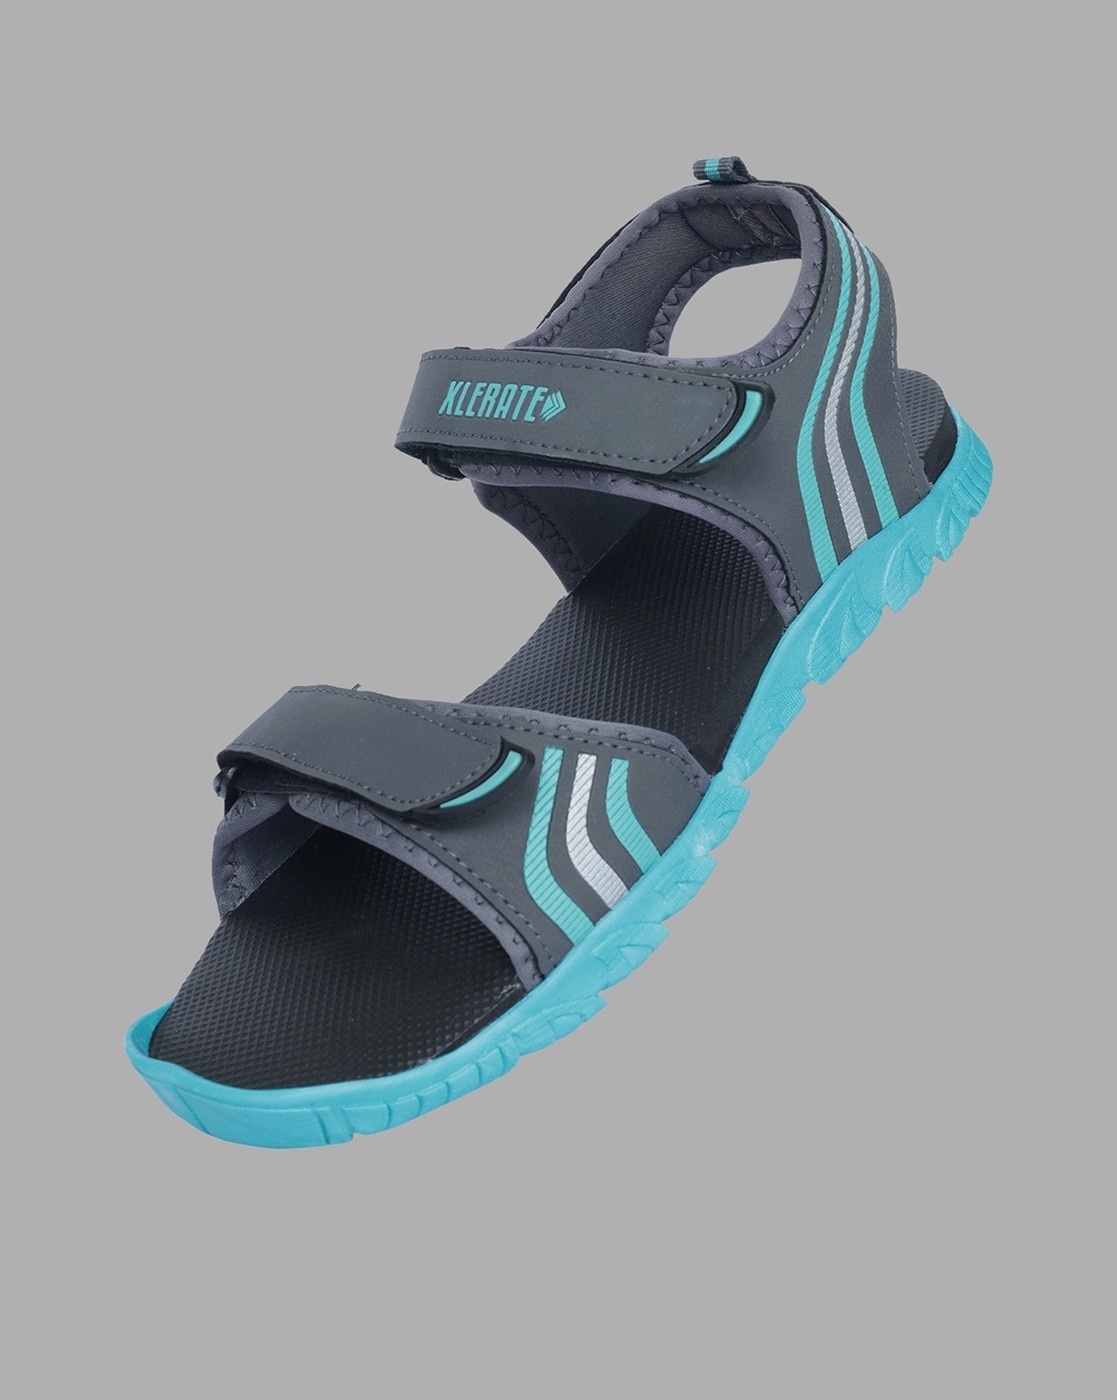 Paragon Blot K1422G Stylish Lightweight Daily Durable Comfortable Formal  Casual Men Blue Sports Sandals - Buy Paragon Blot K1422G Stylish  Lightweight Daily Durable Comfortable Formal Casual Men Blue Sports Sandals  Online at